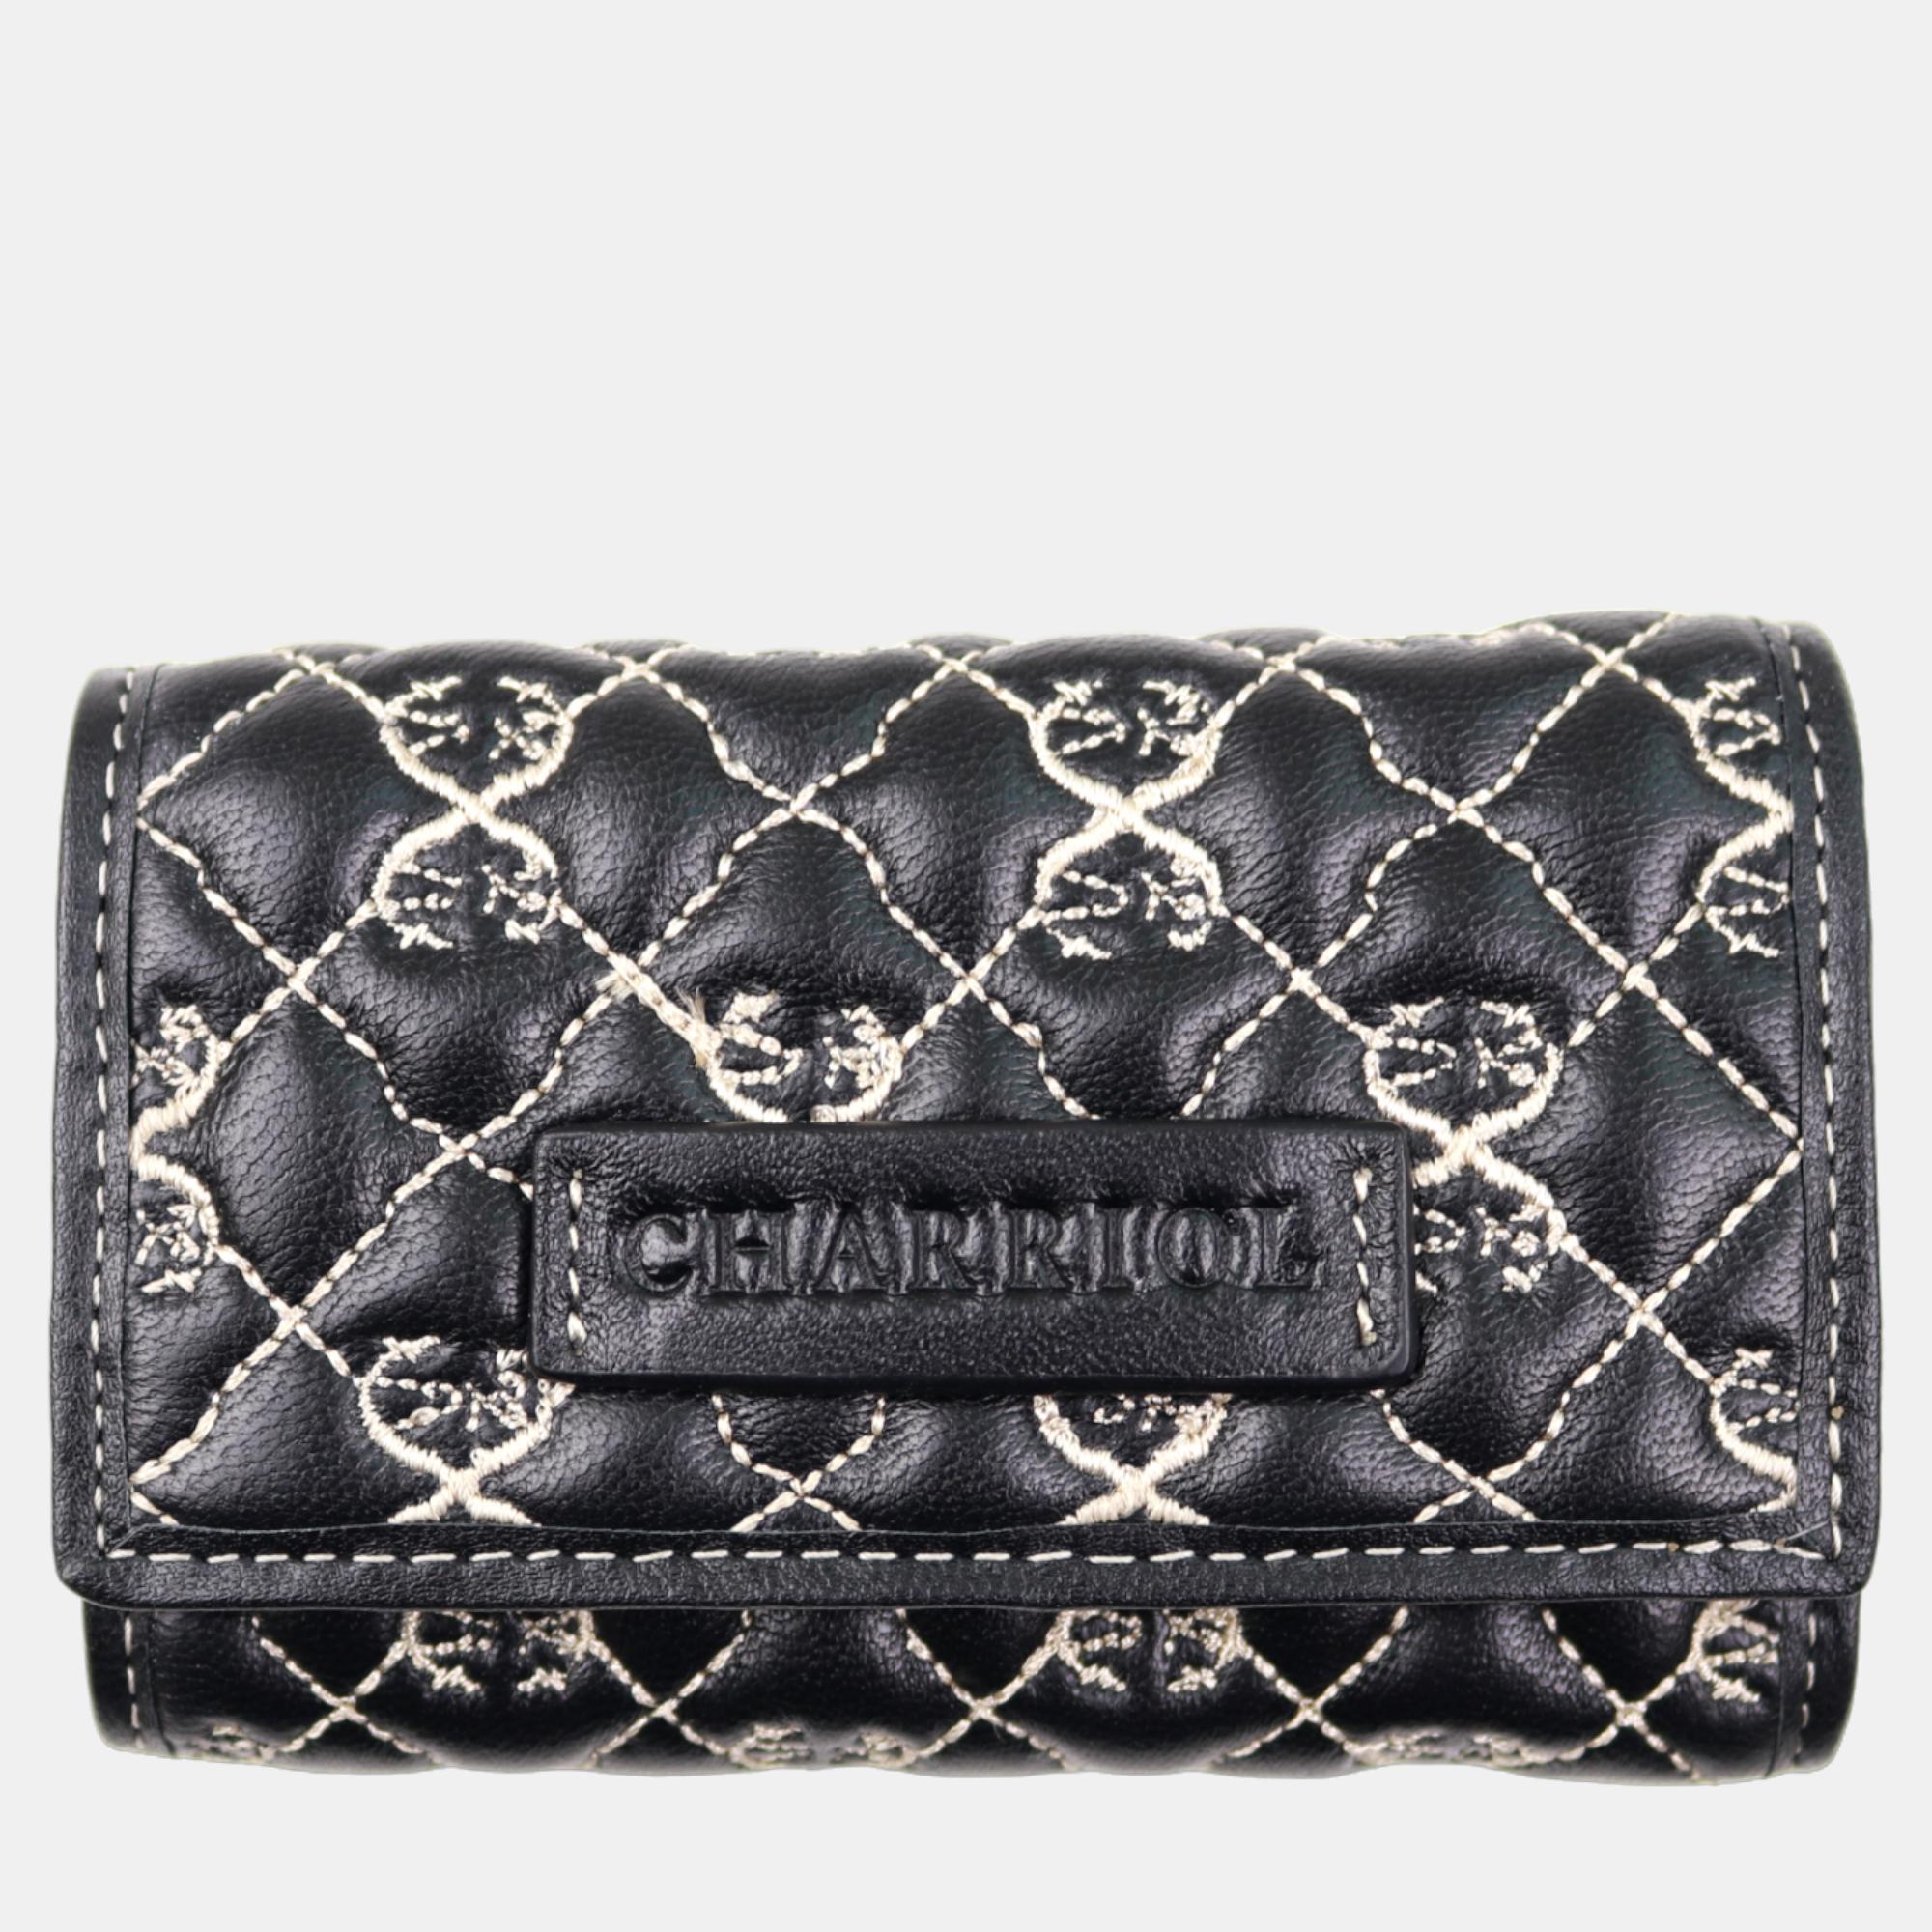 Pre-owned Charriol Black / Beige Leather Quilted Purses